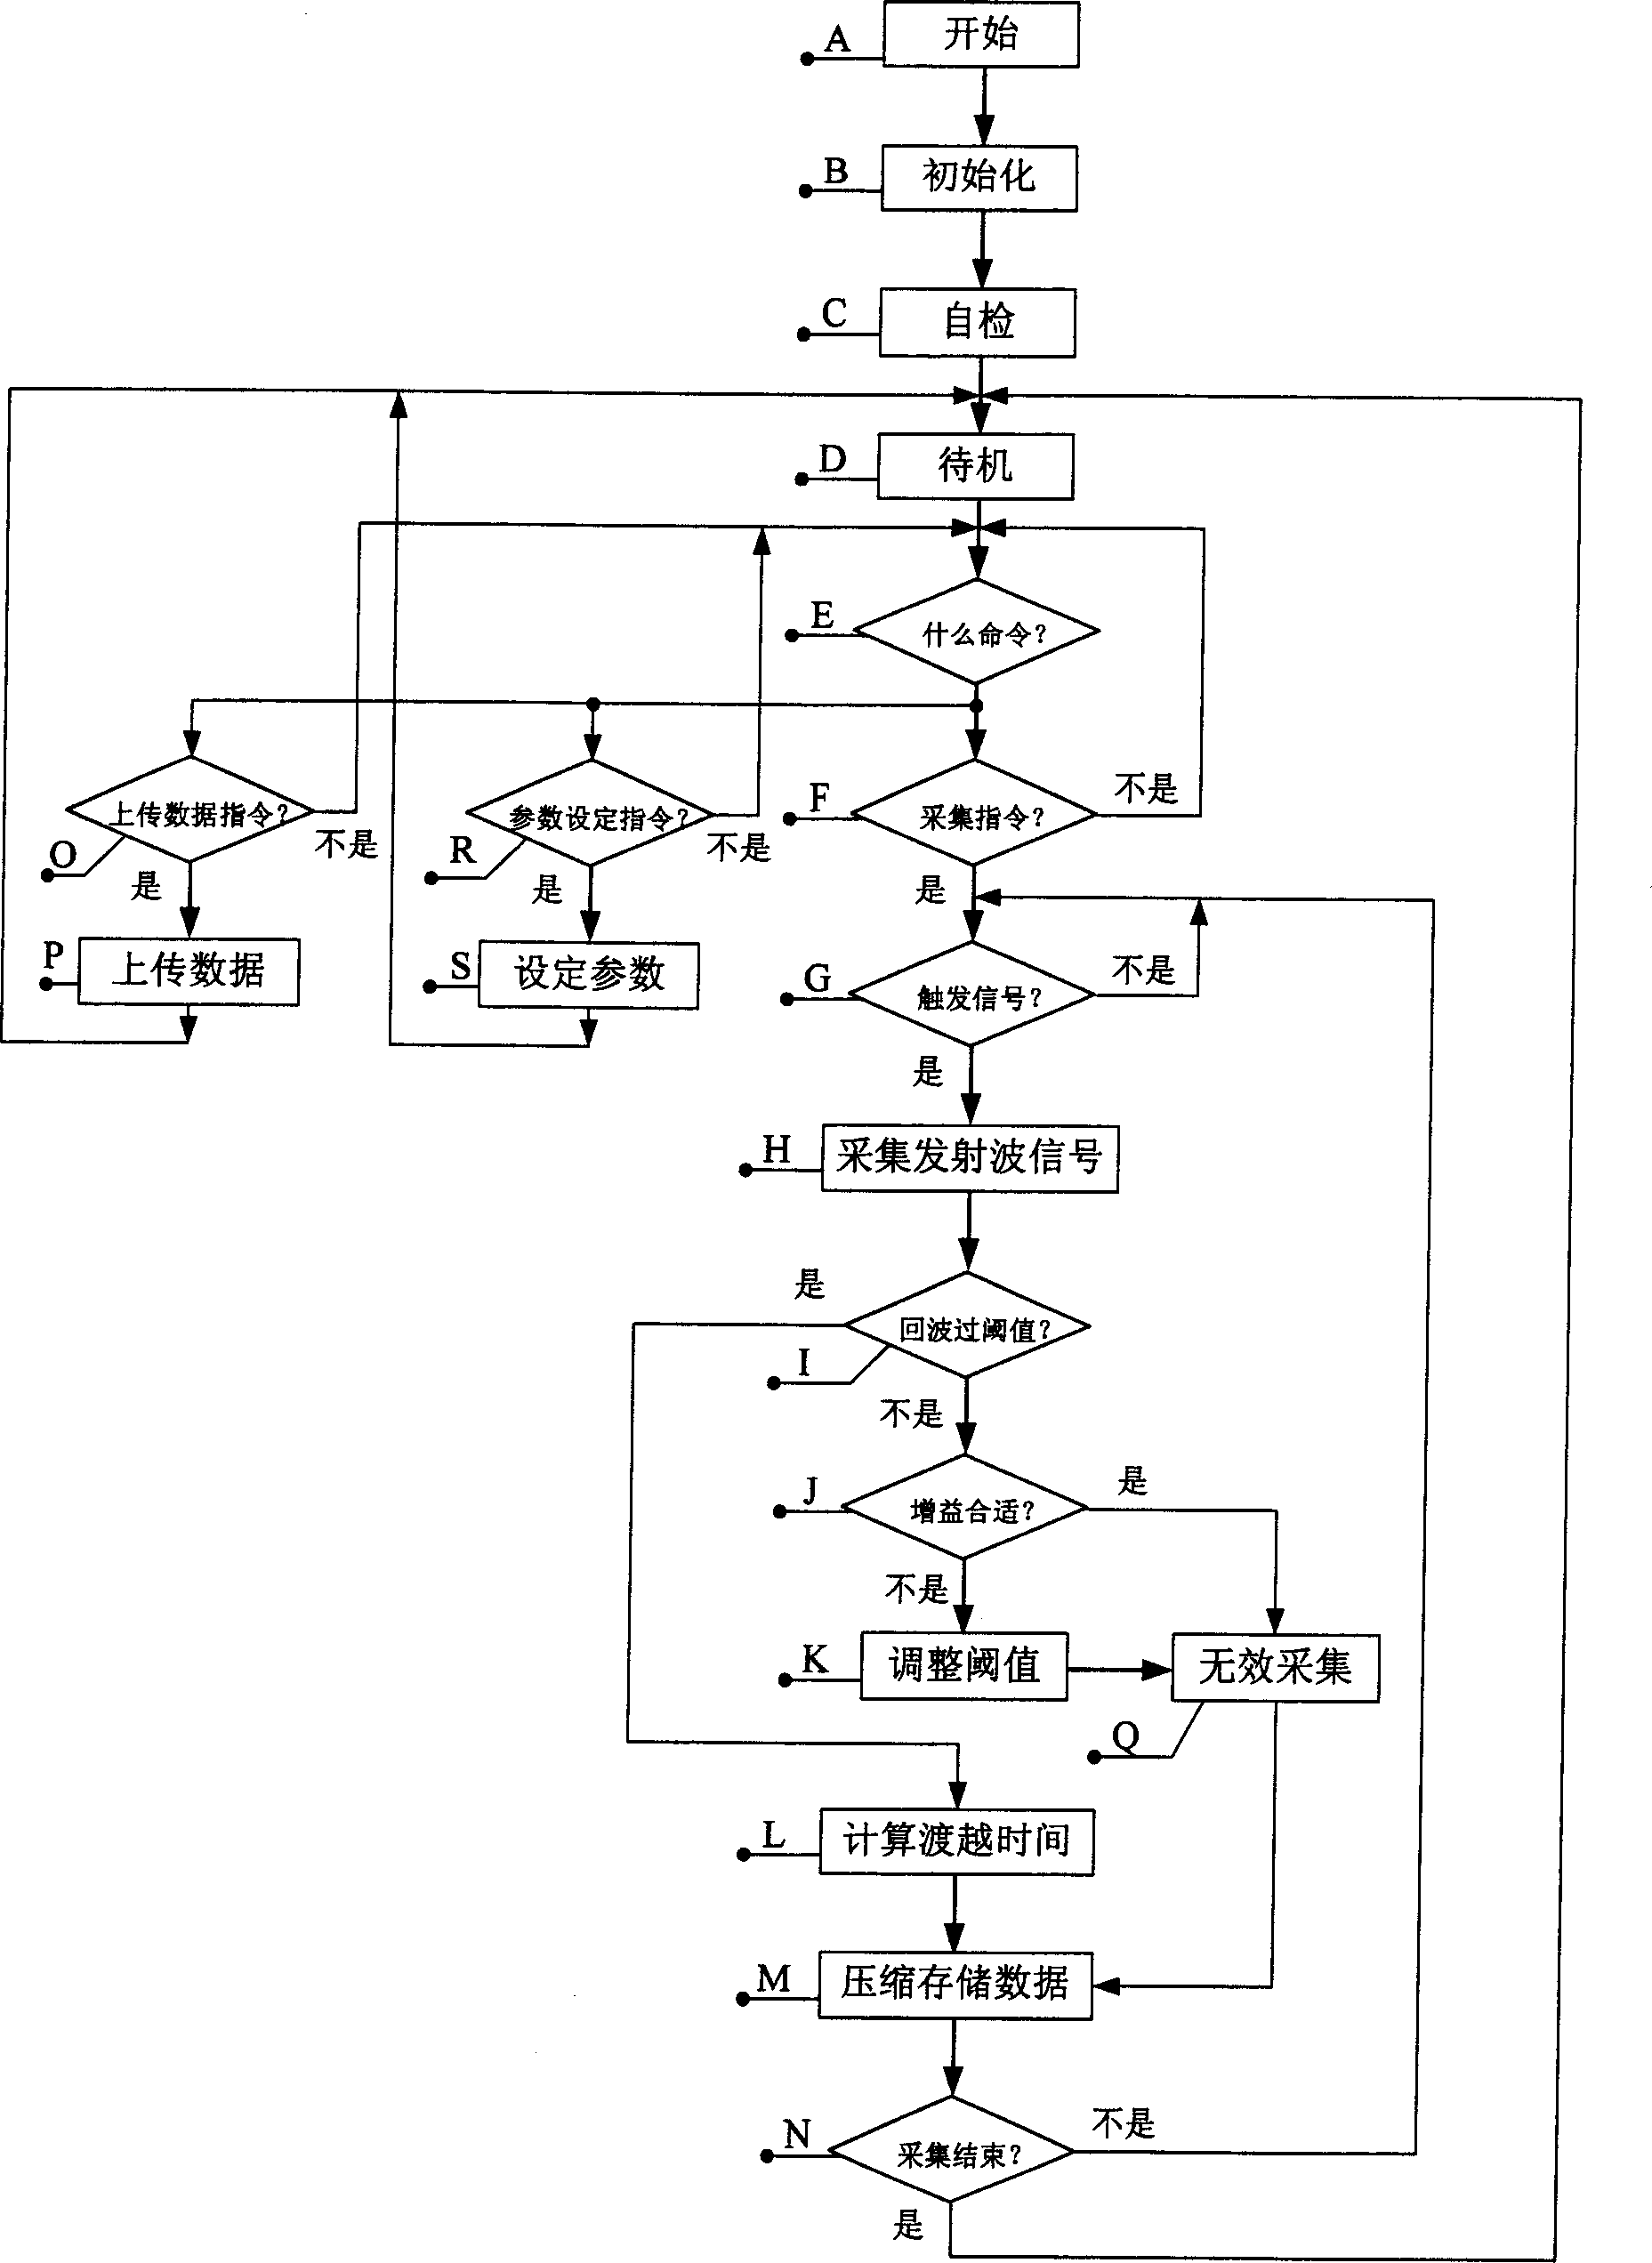 Data acquisition device for laser distance measurement, and its collecting flowchart